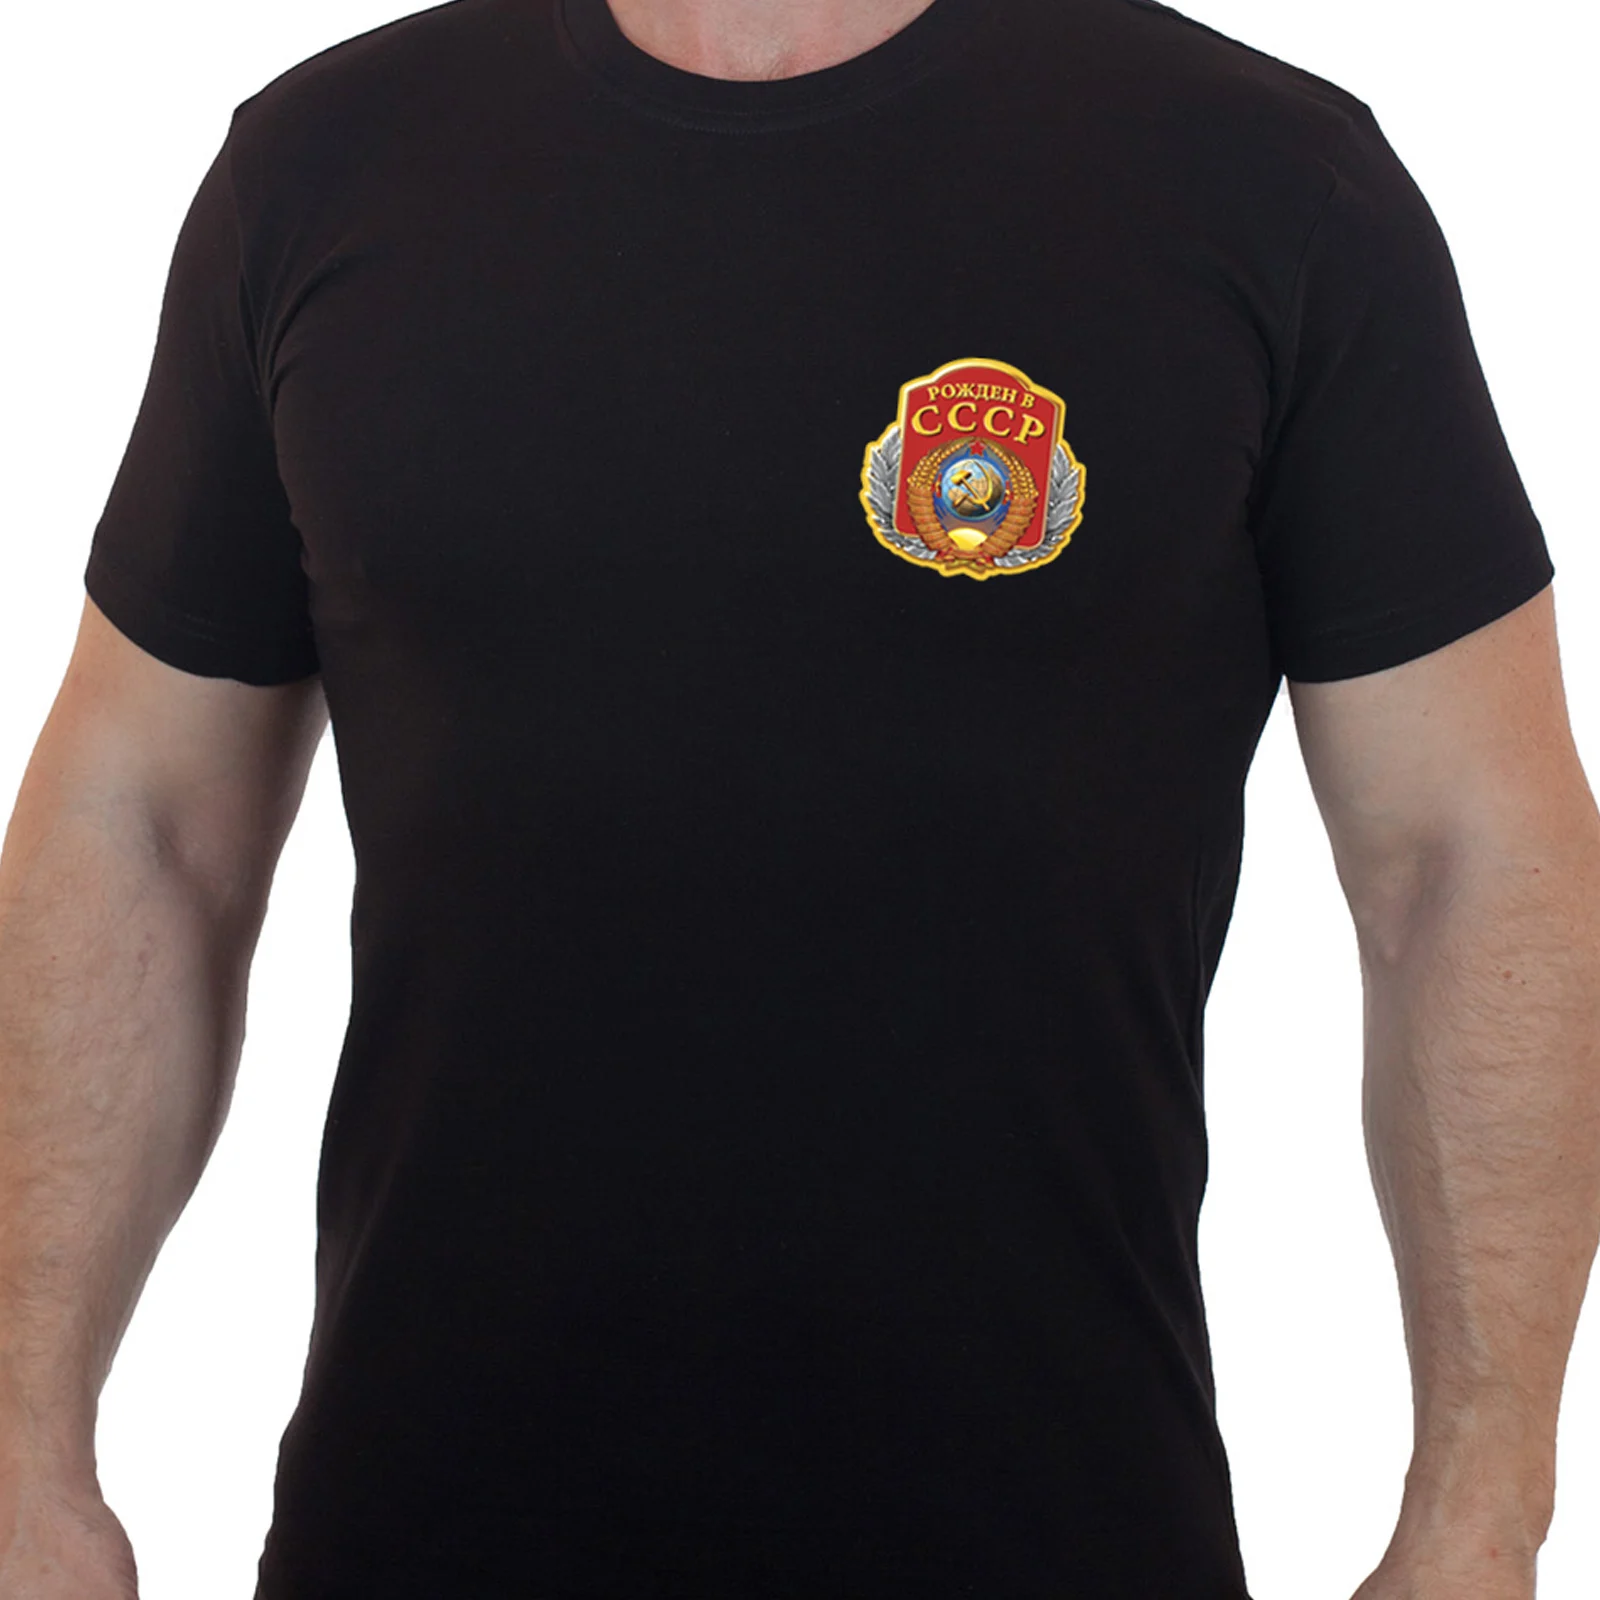 

Born In The Soviet Union CCCP Badge Printed T Shirt. 100% Cotton Short Sleeve O-Neck Casual T-shirts New Size S-3XL